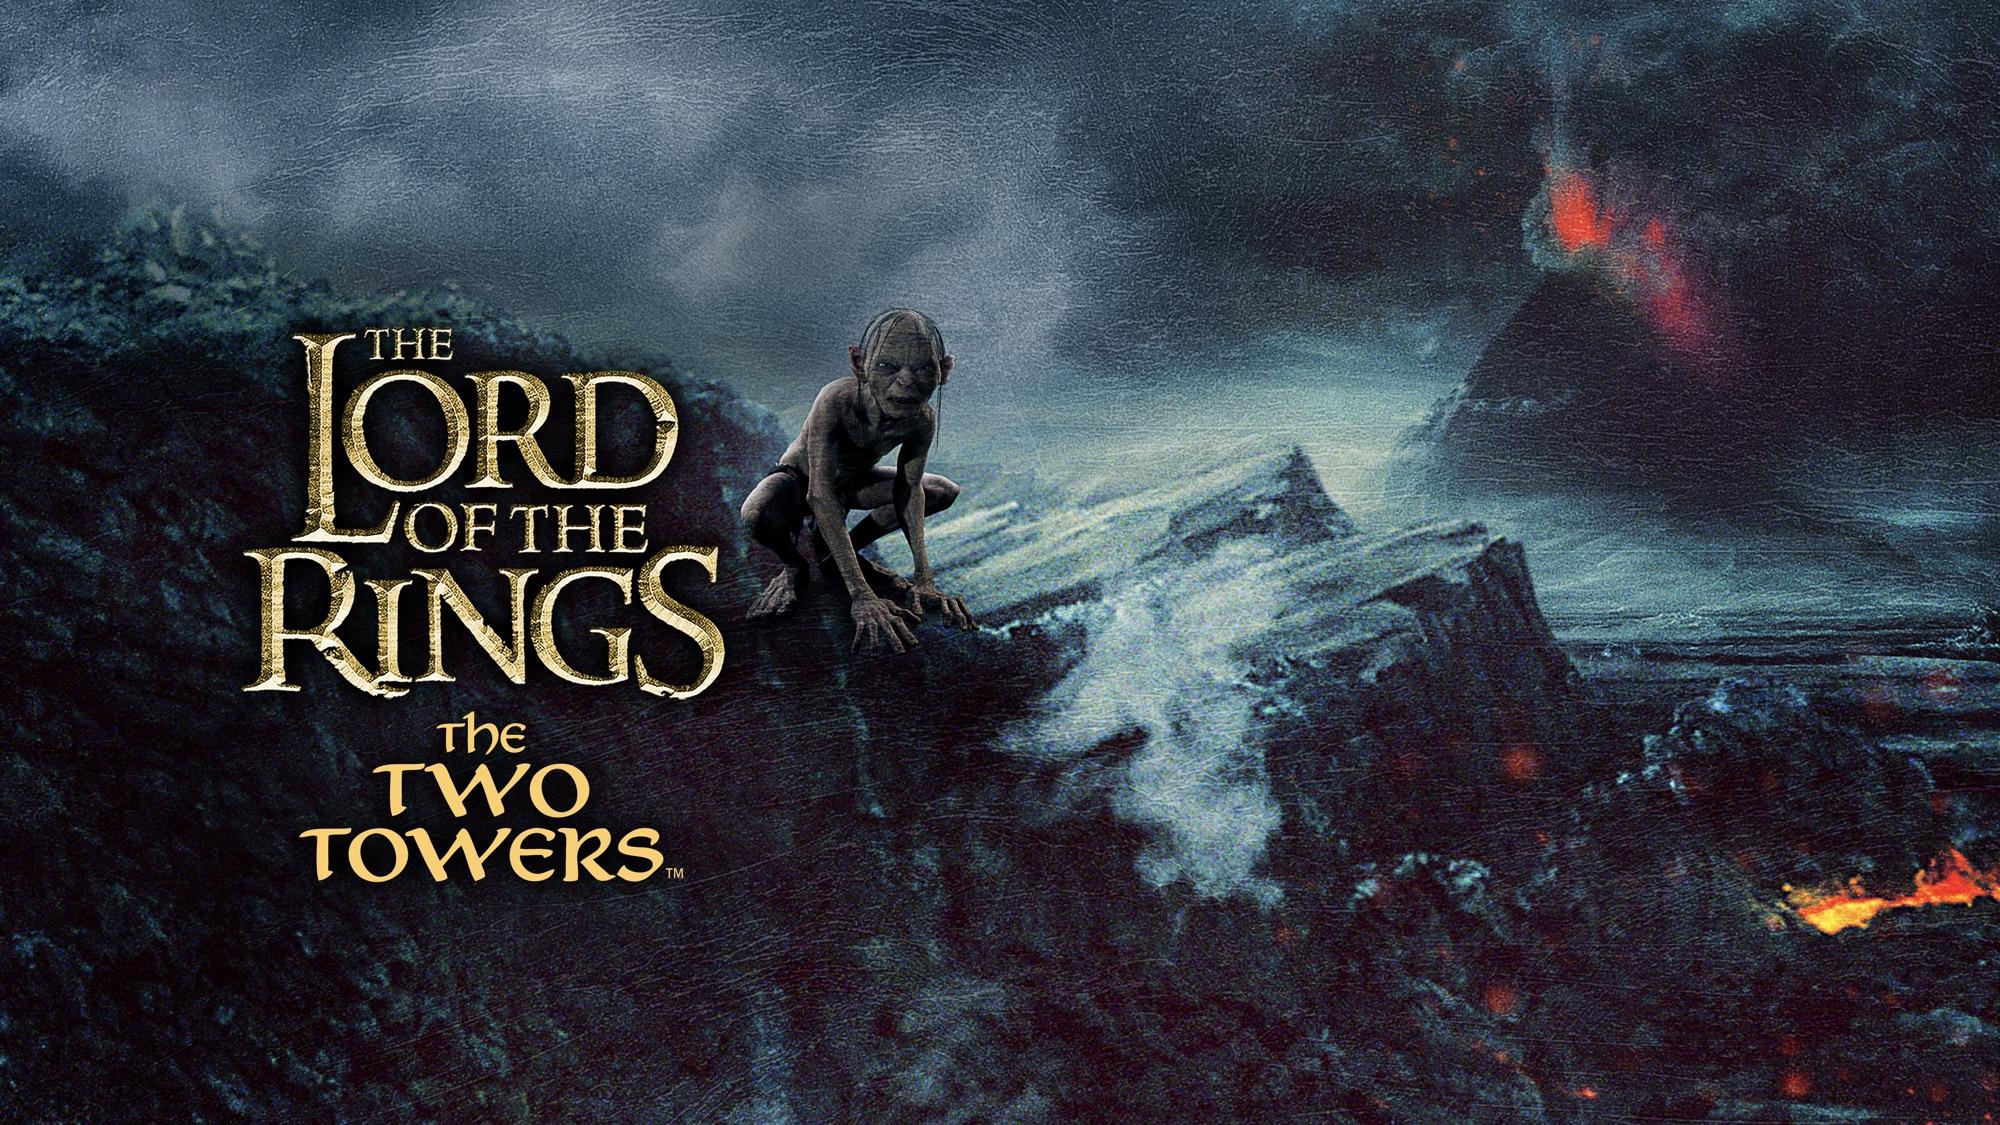 for iphone download The Lord of the Rings: The Two Towers